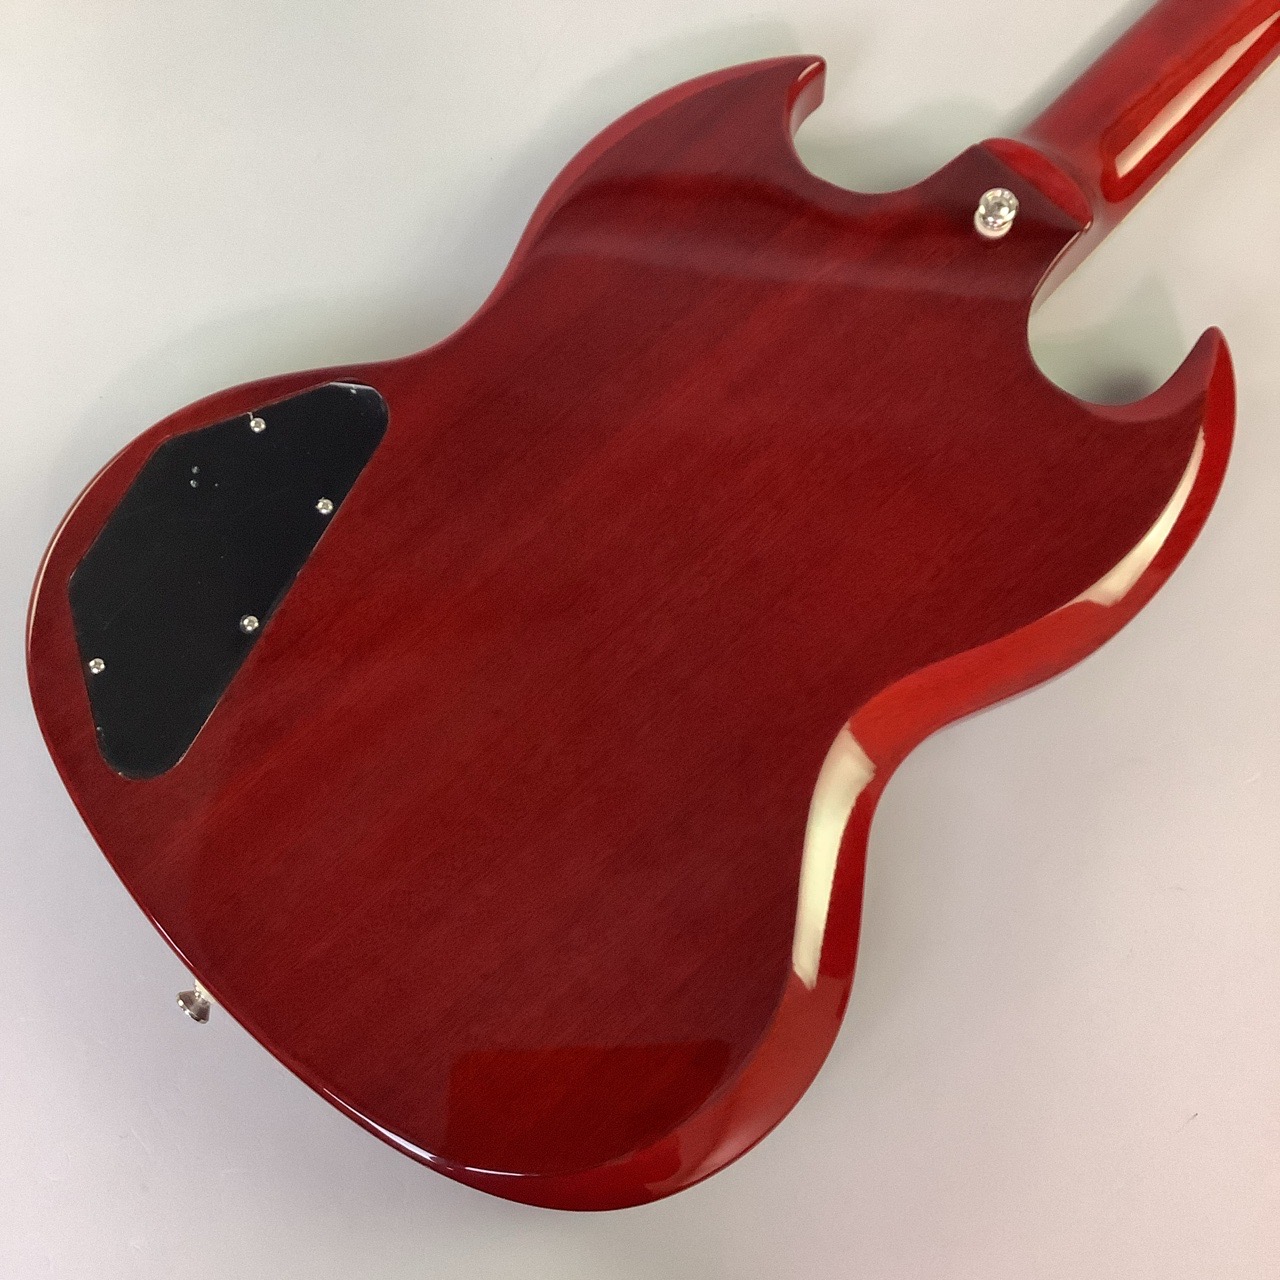 Epiphone Inspired by Gibson SG standard エピフォン 【 成田 